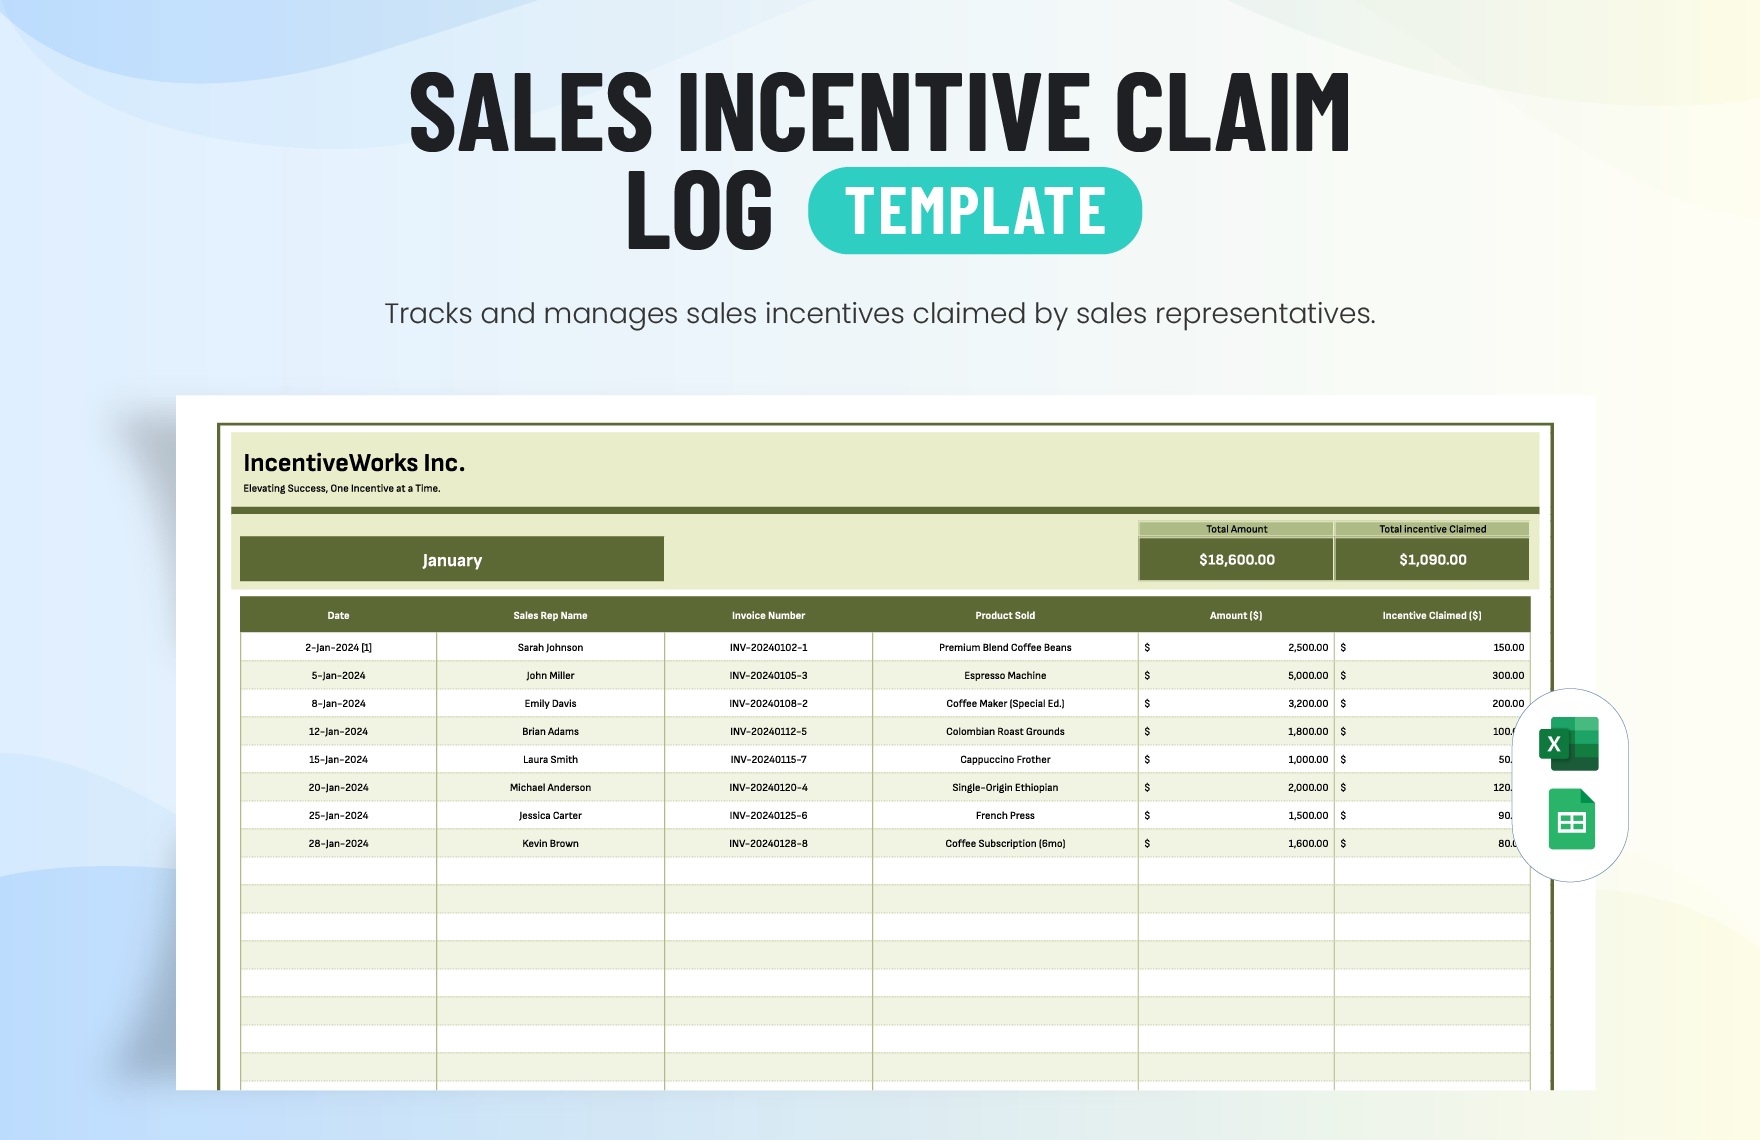 Sales Incentive Claim Log Template in Excel, Google Sheets